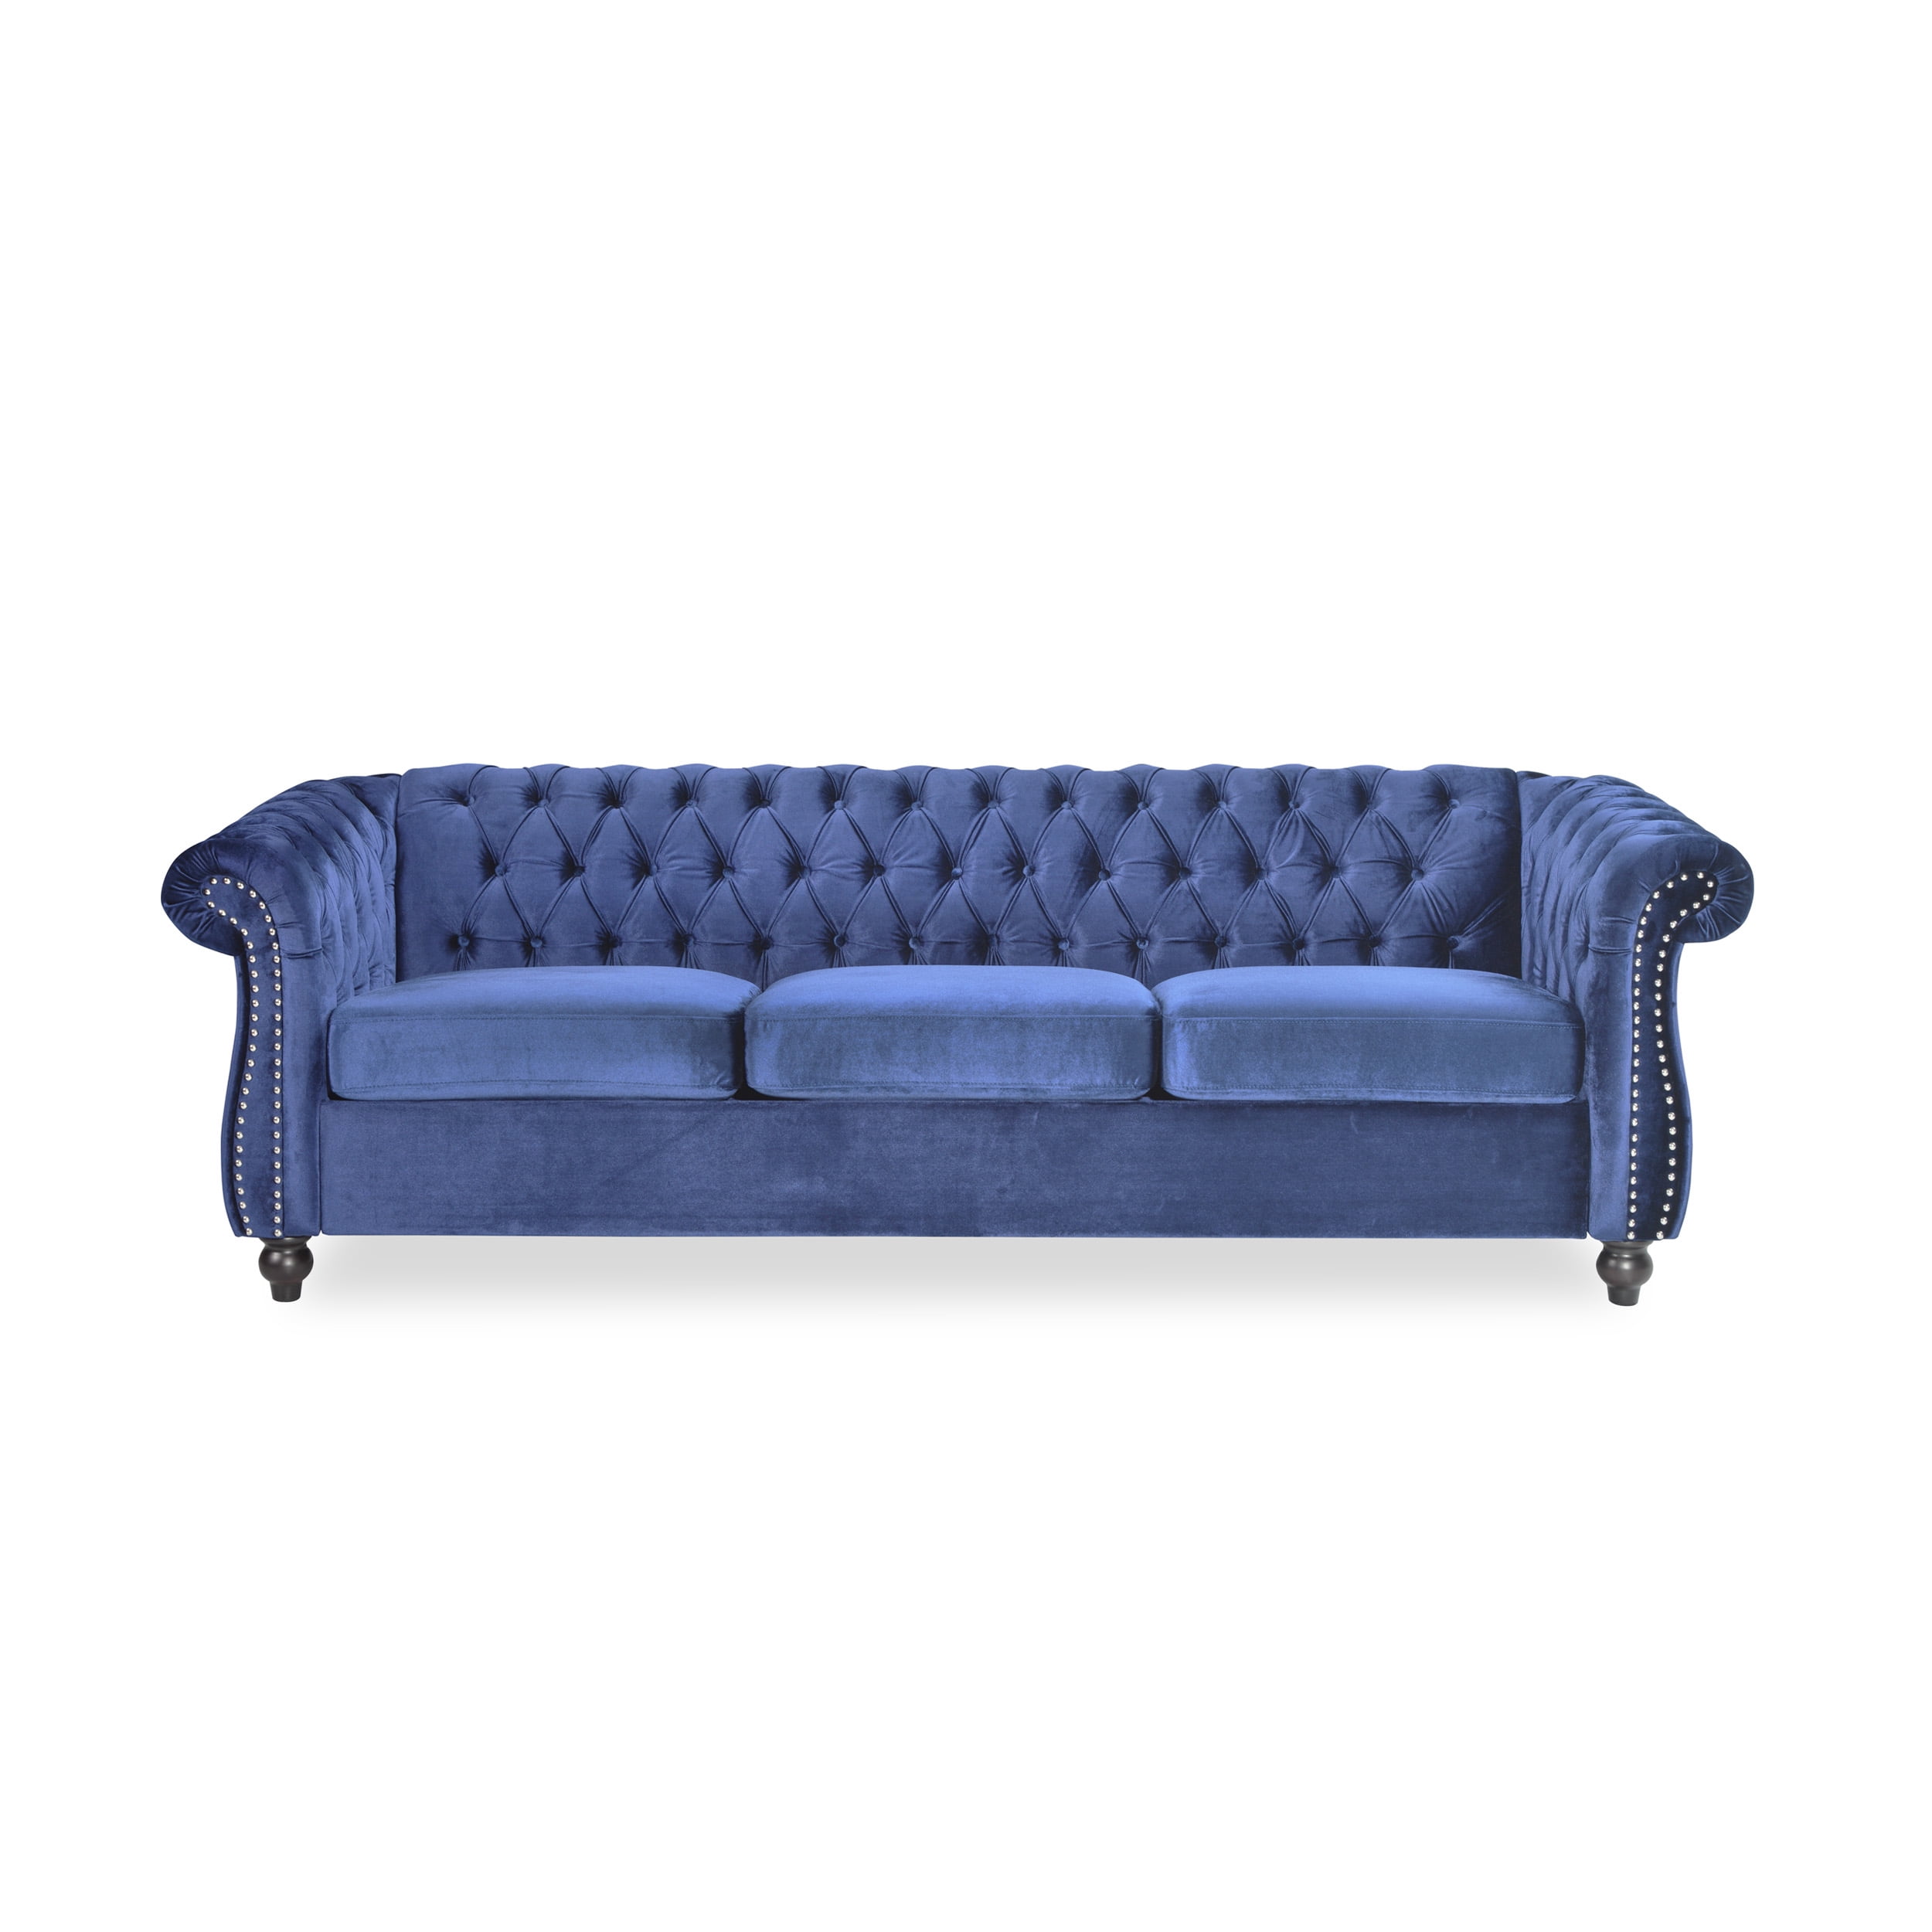 Kinzie Chesterfield Tufted Fabric 3, Kinzie Chesterfield Tufted 3 Seater Sofa With Nailhead Trim